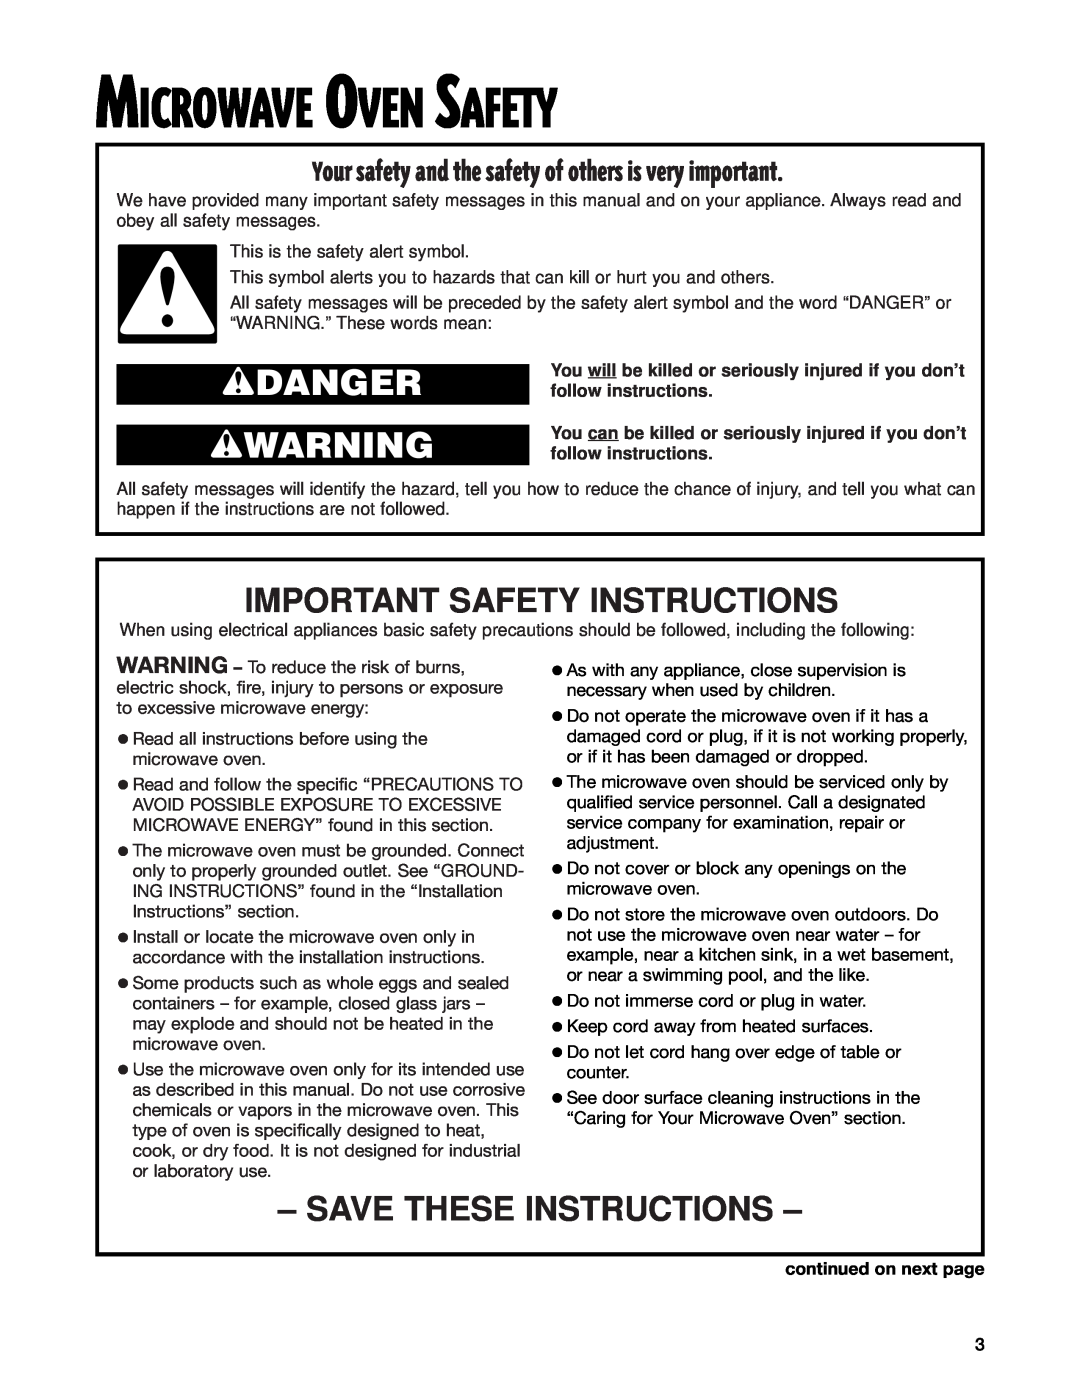 Whirlpool MT1100SH Microwave Oven Safety, Important Safety Instructions, Save These Instructions, wDANGER wWARNING 